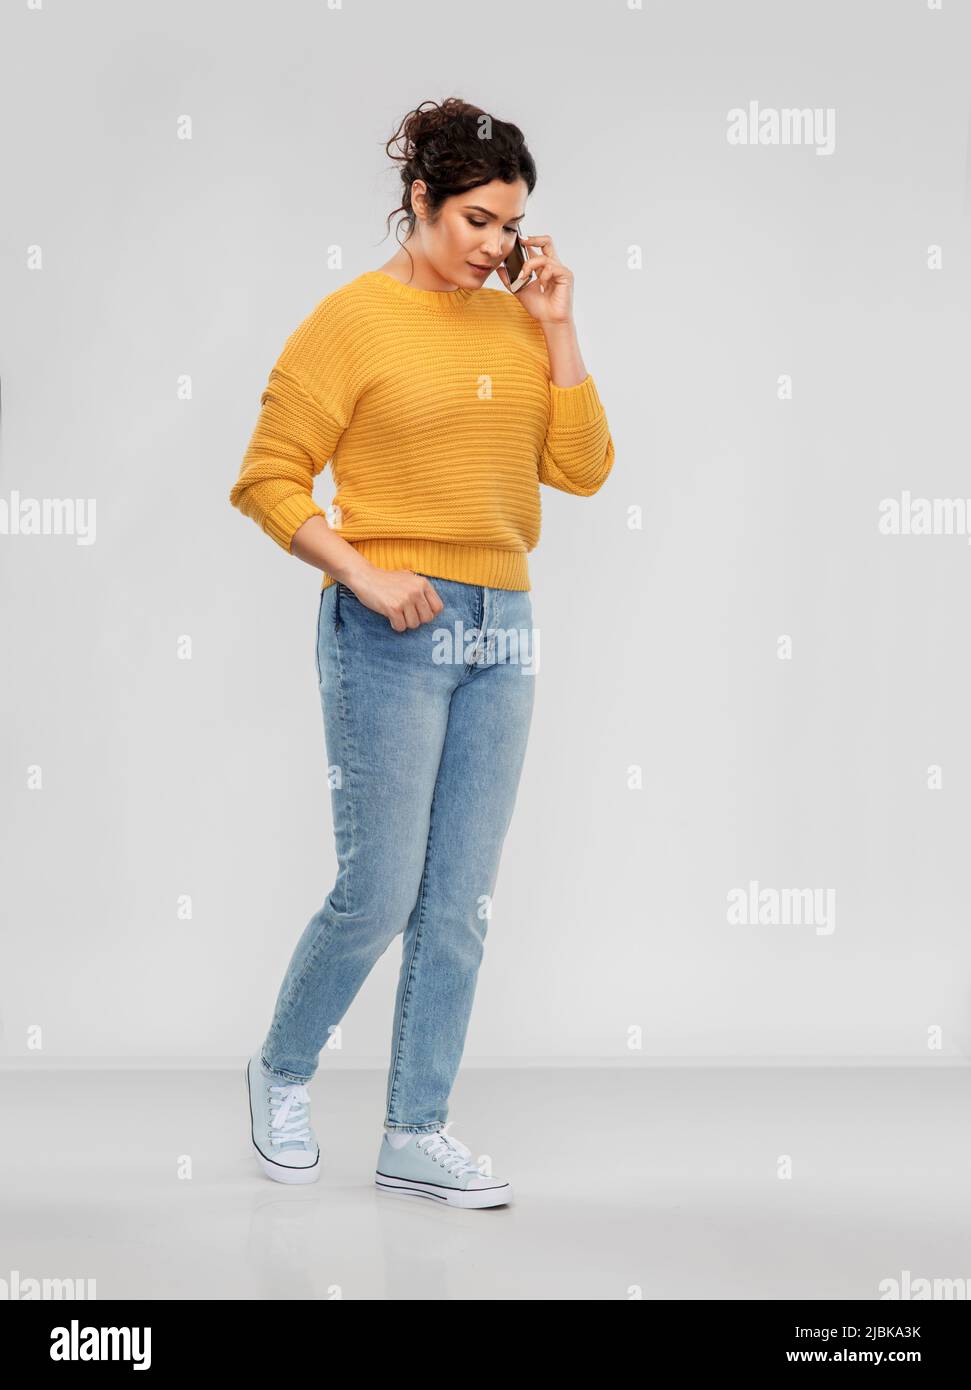 happy young woman calling on smartphone Stock Photo